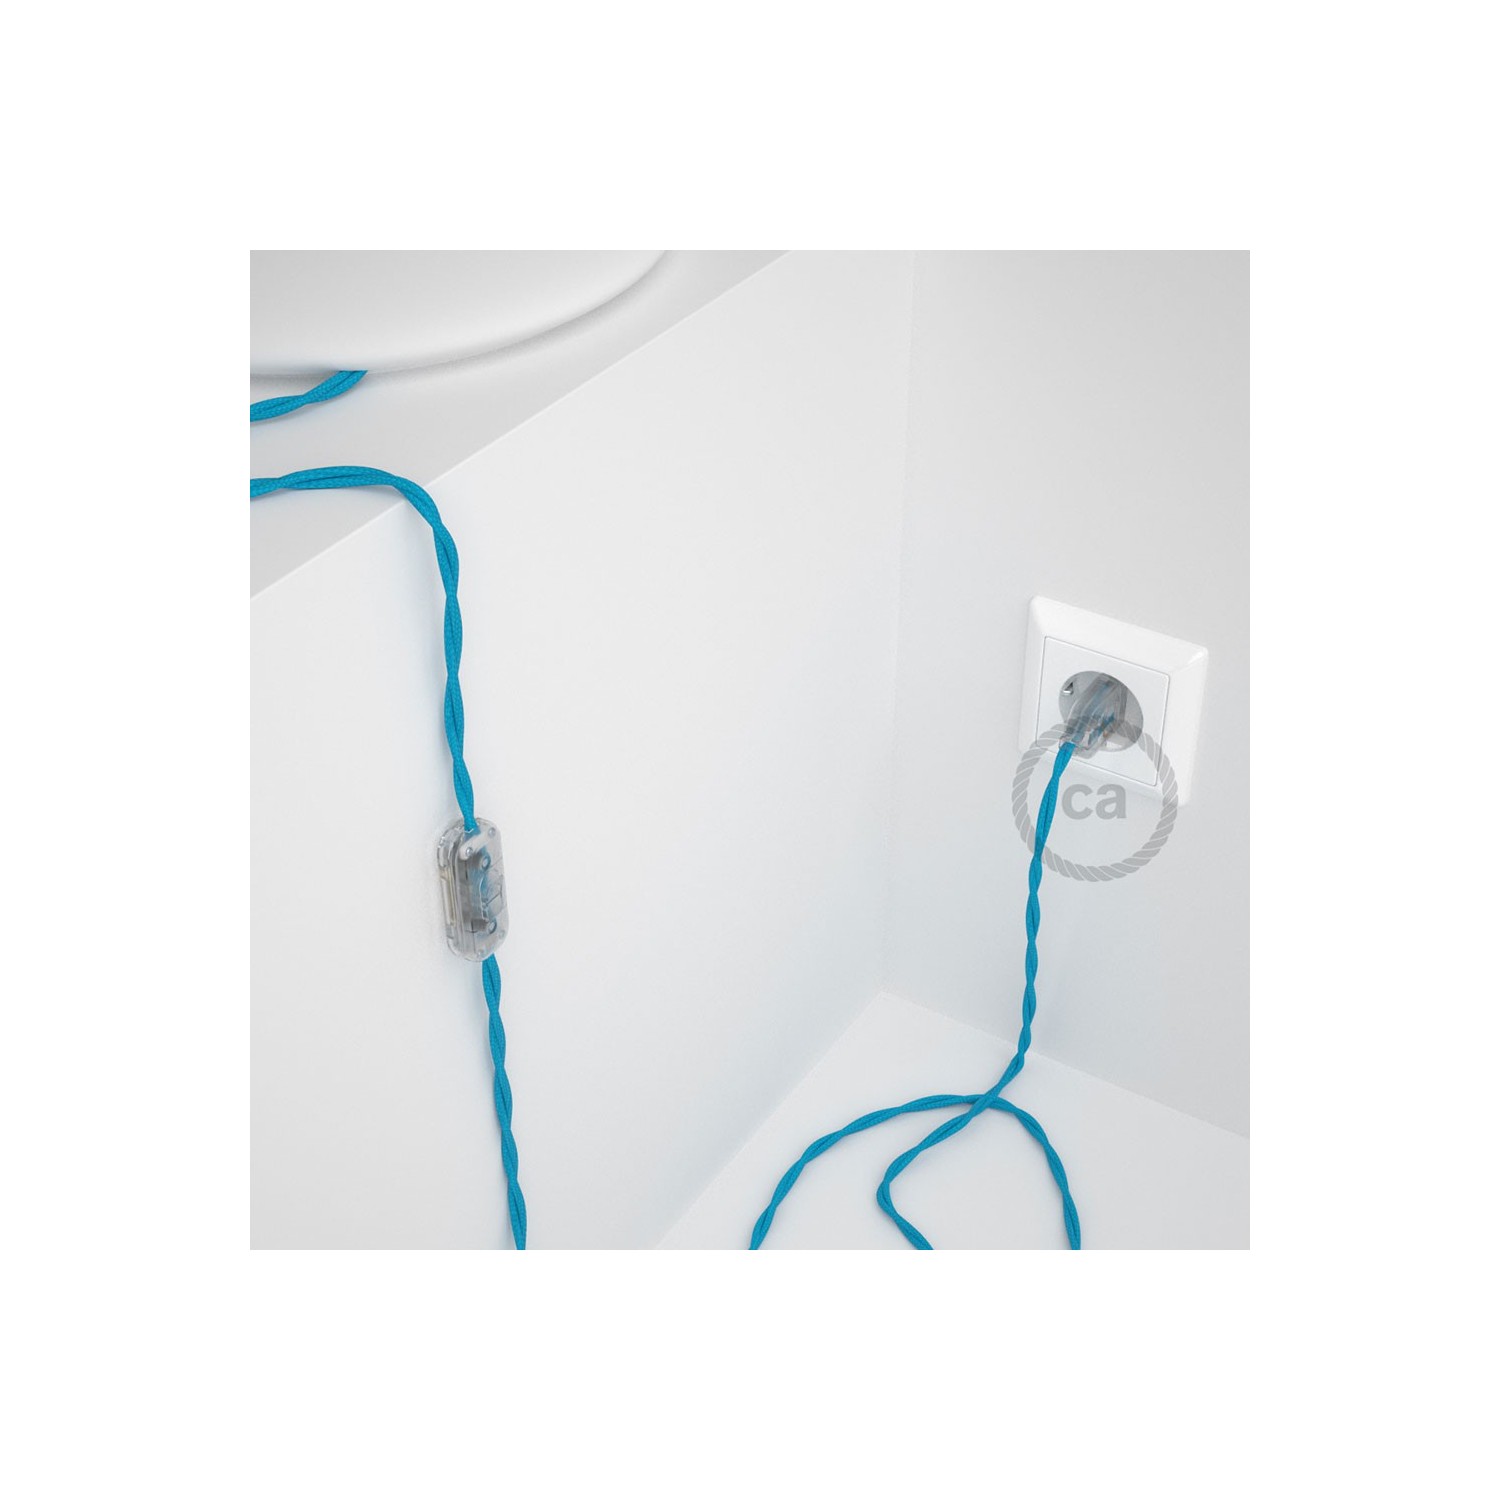 Lamp wiring, TM11 Turquoise Rayon 1,80 m. Choose the colour of the switch and plug.